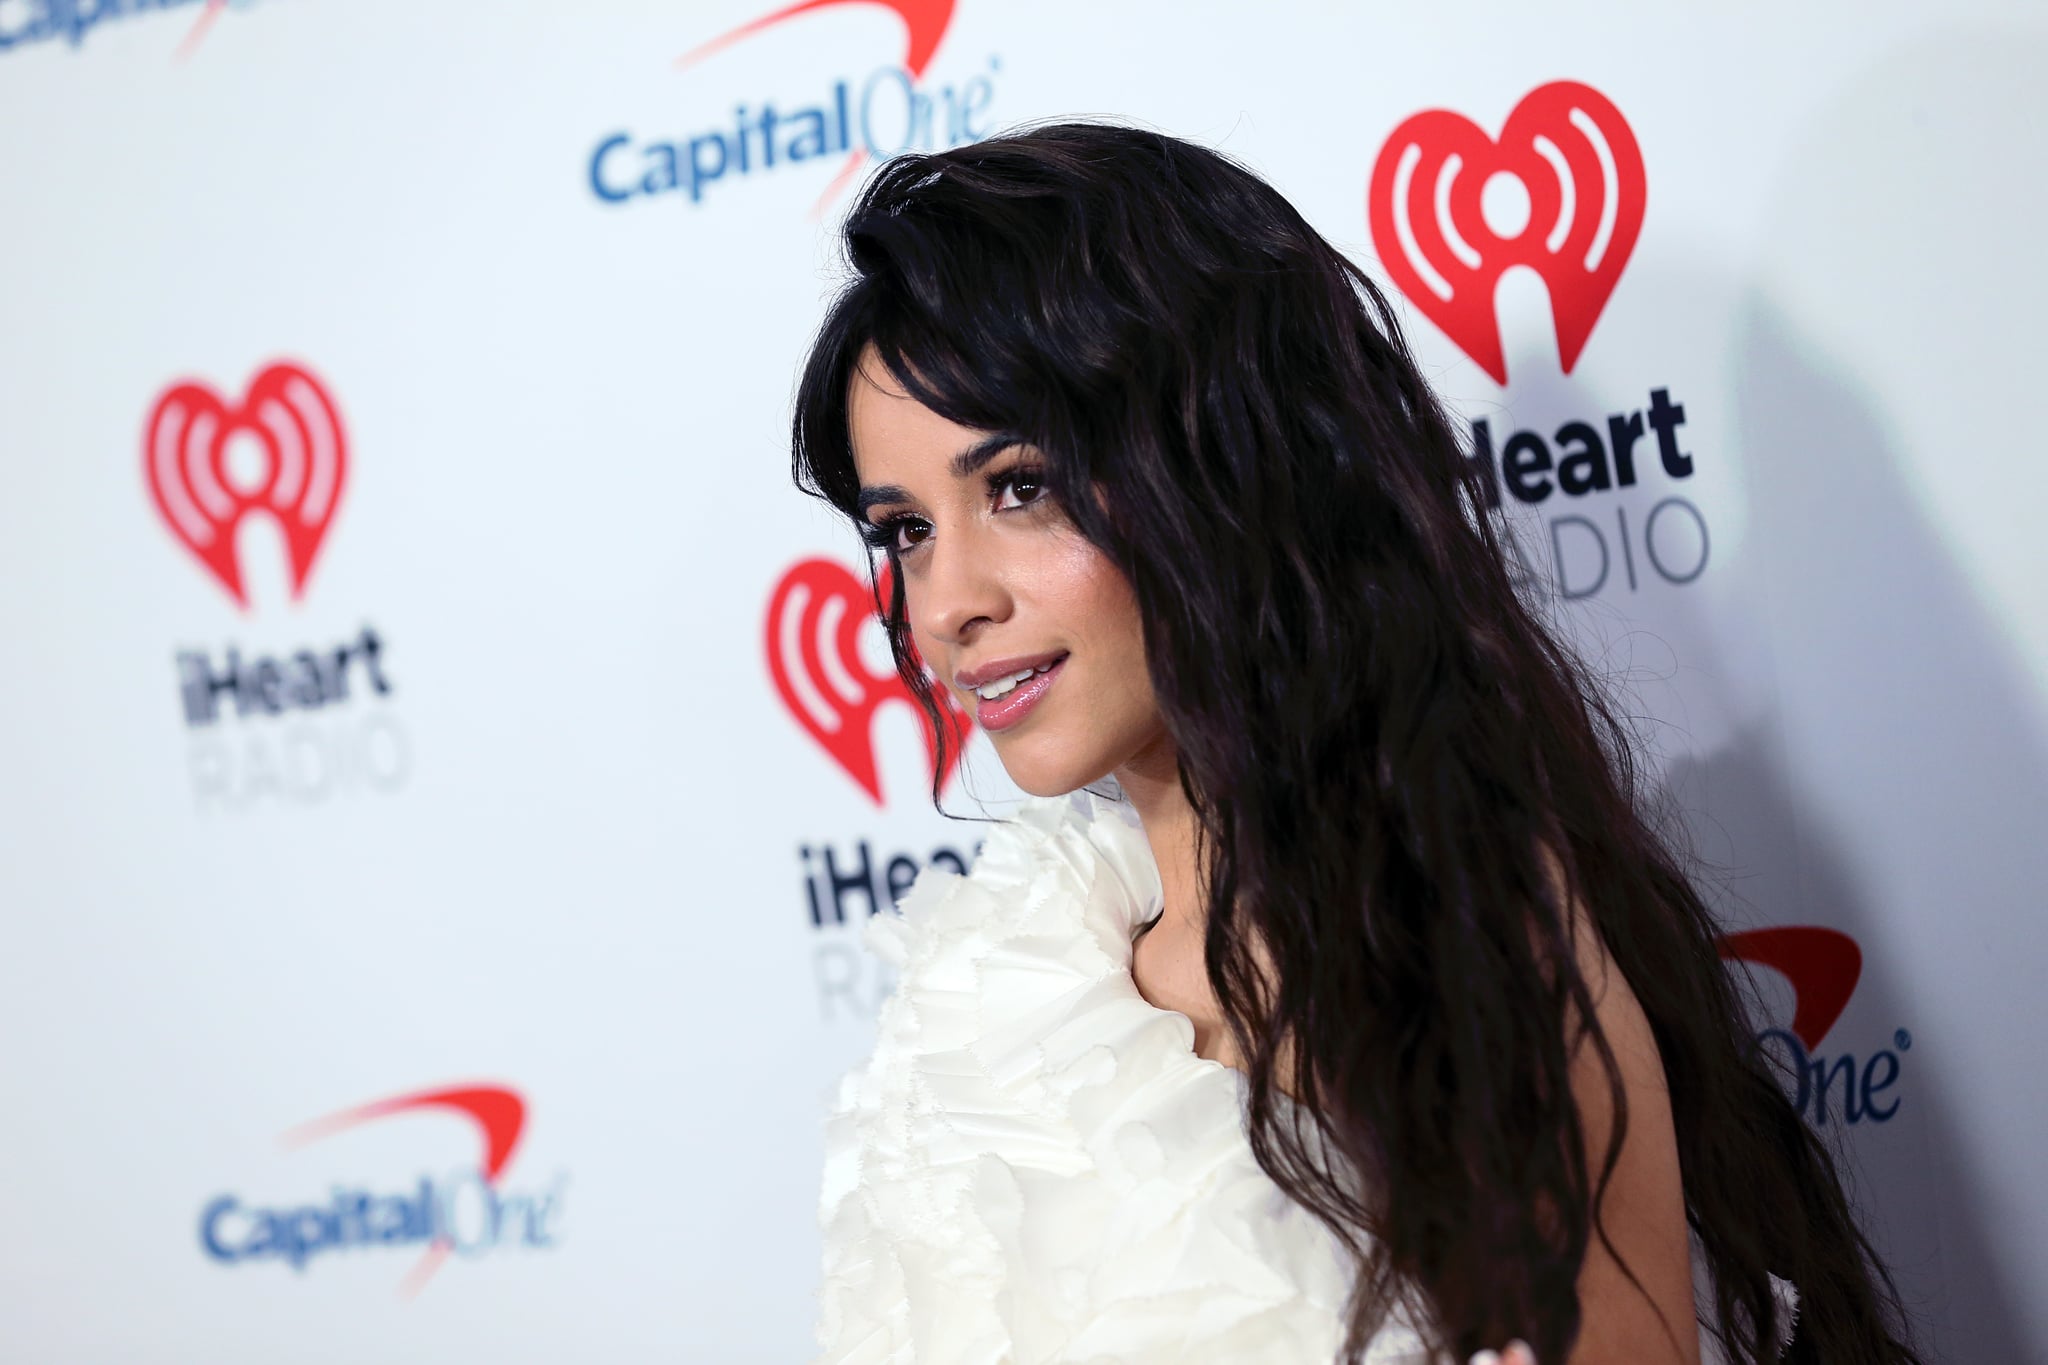 INGLEWOOD, CALIFORNIA - DECEMBER 06: Camila Cabello attends KIIS FM's Jingle Ball 2019 presented by Capital One at The Forum on December 06, 2019 in Inglewood, California. (Photo by David Livingston/FilmMagic )